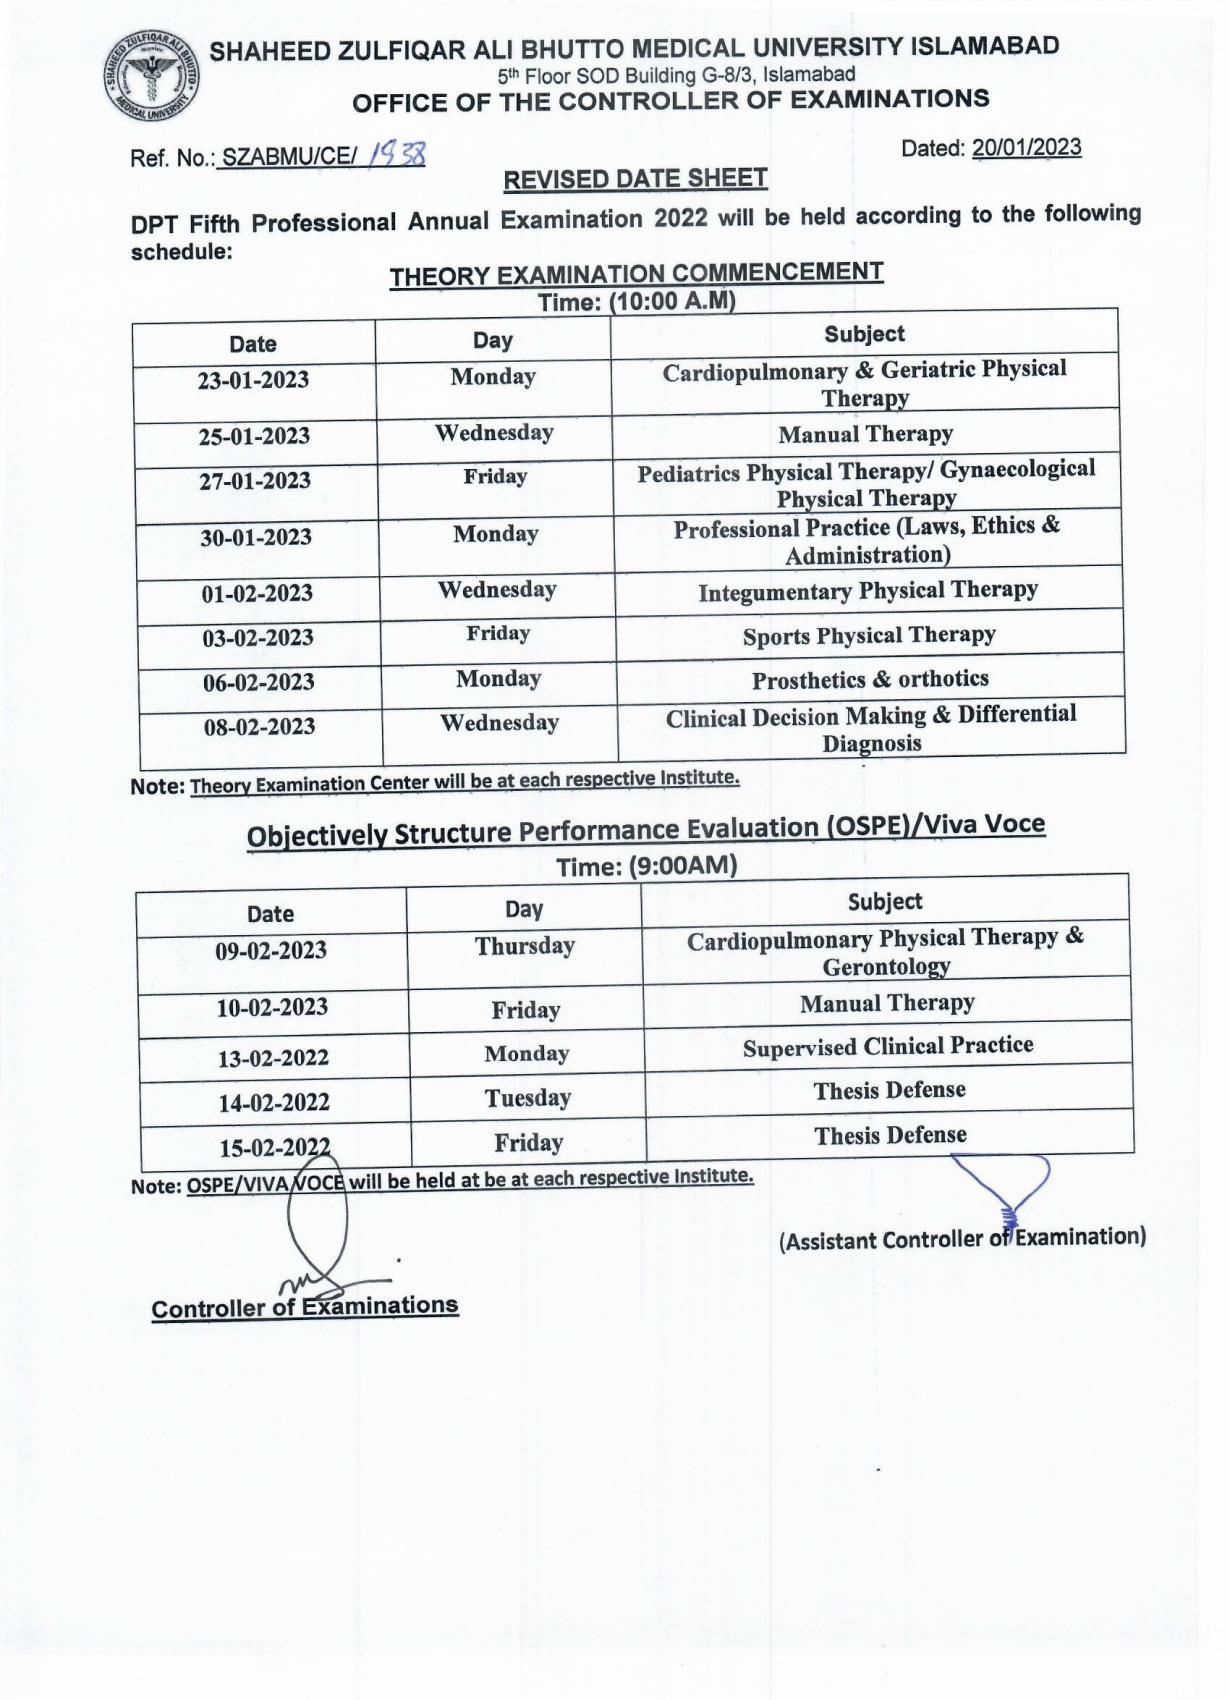 Revised - DPT Fifth Professional Annual Examination 2022